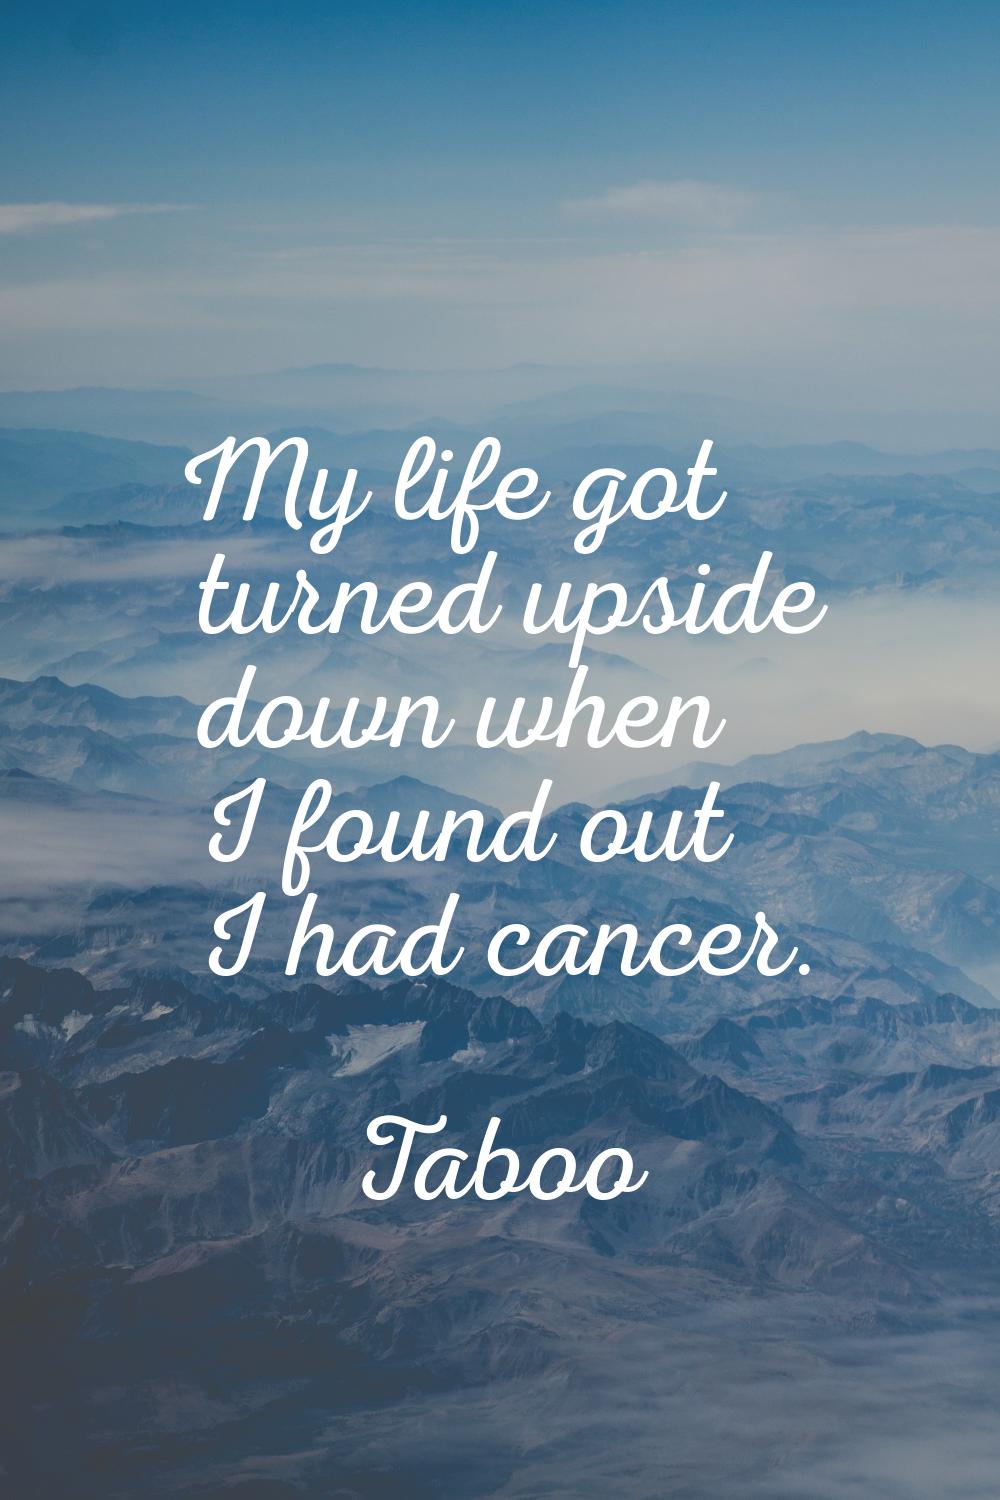 My life got turned upside down when I found out I had cancer.